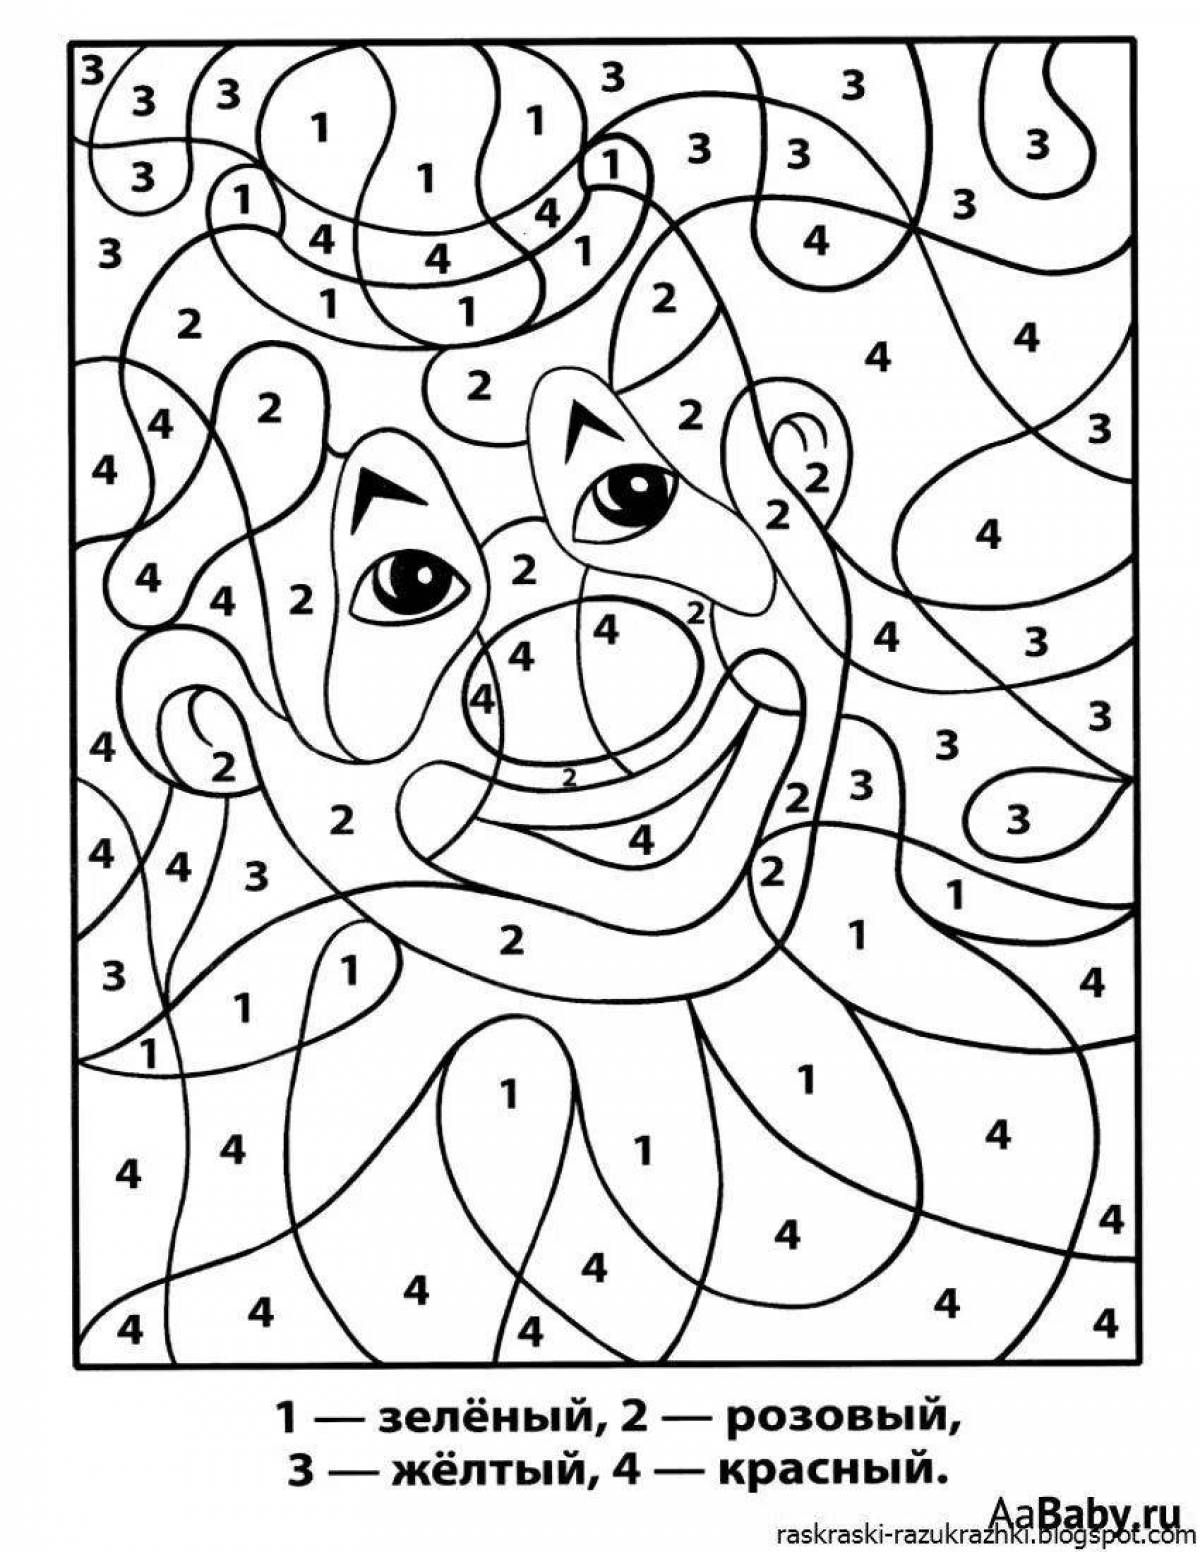 Inspirational coloring book for intellectuals